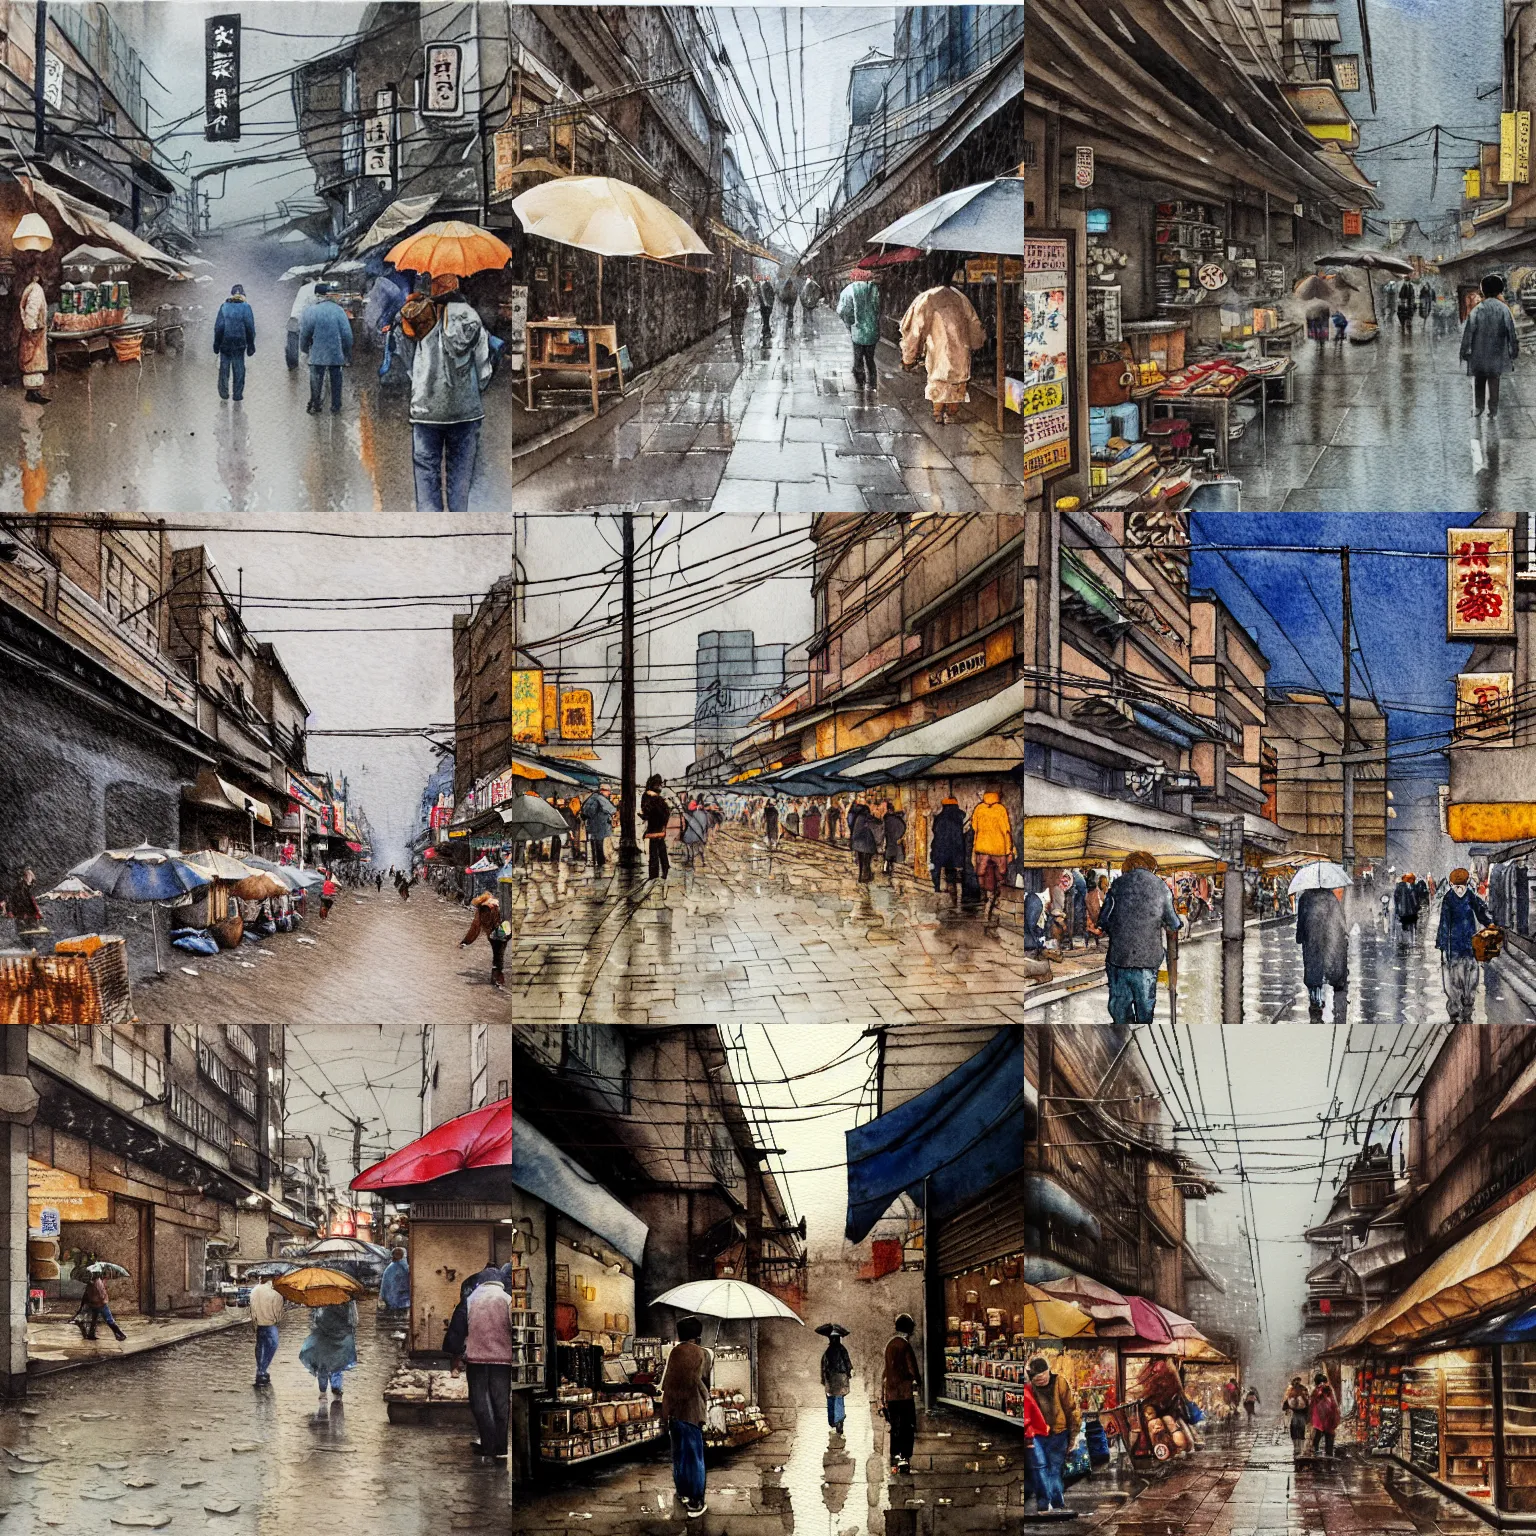 Prompt: street scene, low angle, tatsuyuki tanaka, detailed watercolor, back lit, paper texture, movie scene, old japanese street market, people shopping, wet ground, raining, misty, spot light, texture, brown cobble stones, dust, overhead wires, telephone pole, dusty, pencil marks, hd, 4k, remaster, dynamic camera angle, deep 3 point perspective, fish eye, dynamic scene - W768